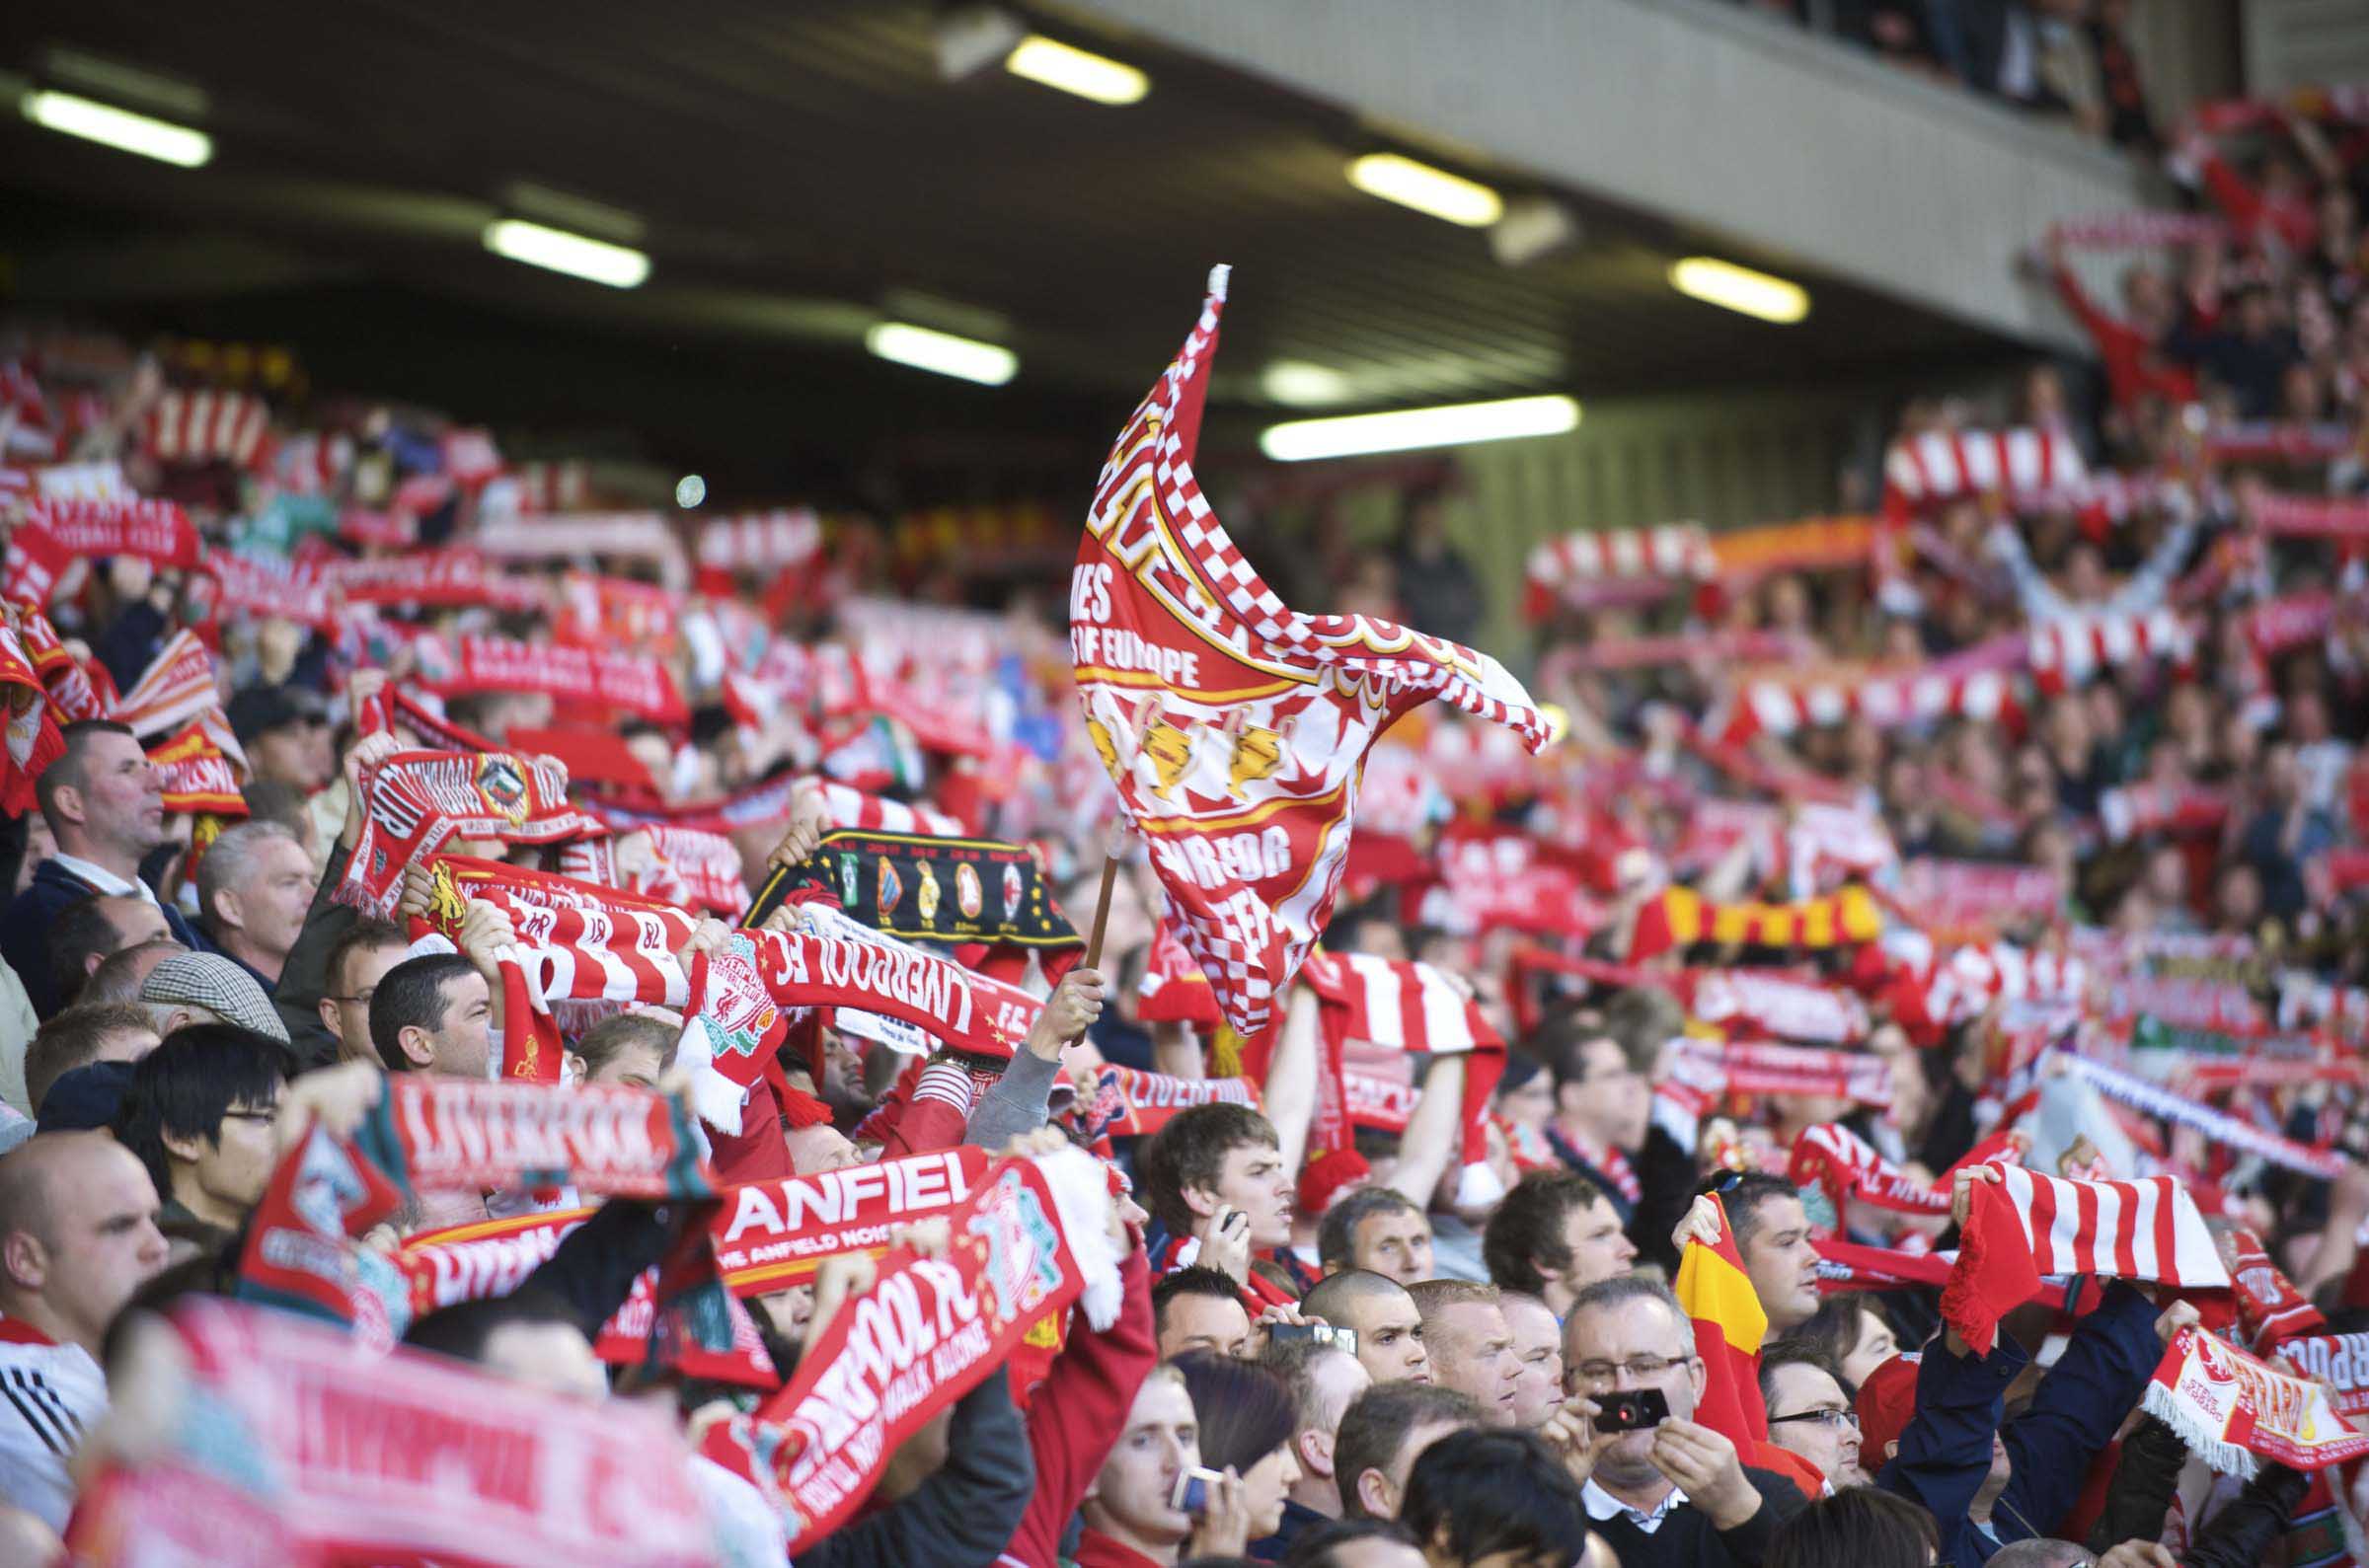 STORY OF THE BOOS #2: FIVE PLAYERS JEERED BY THE KOP